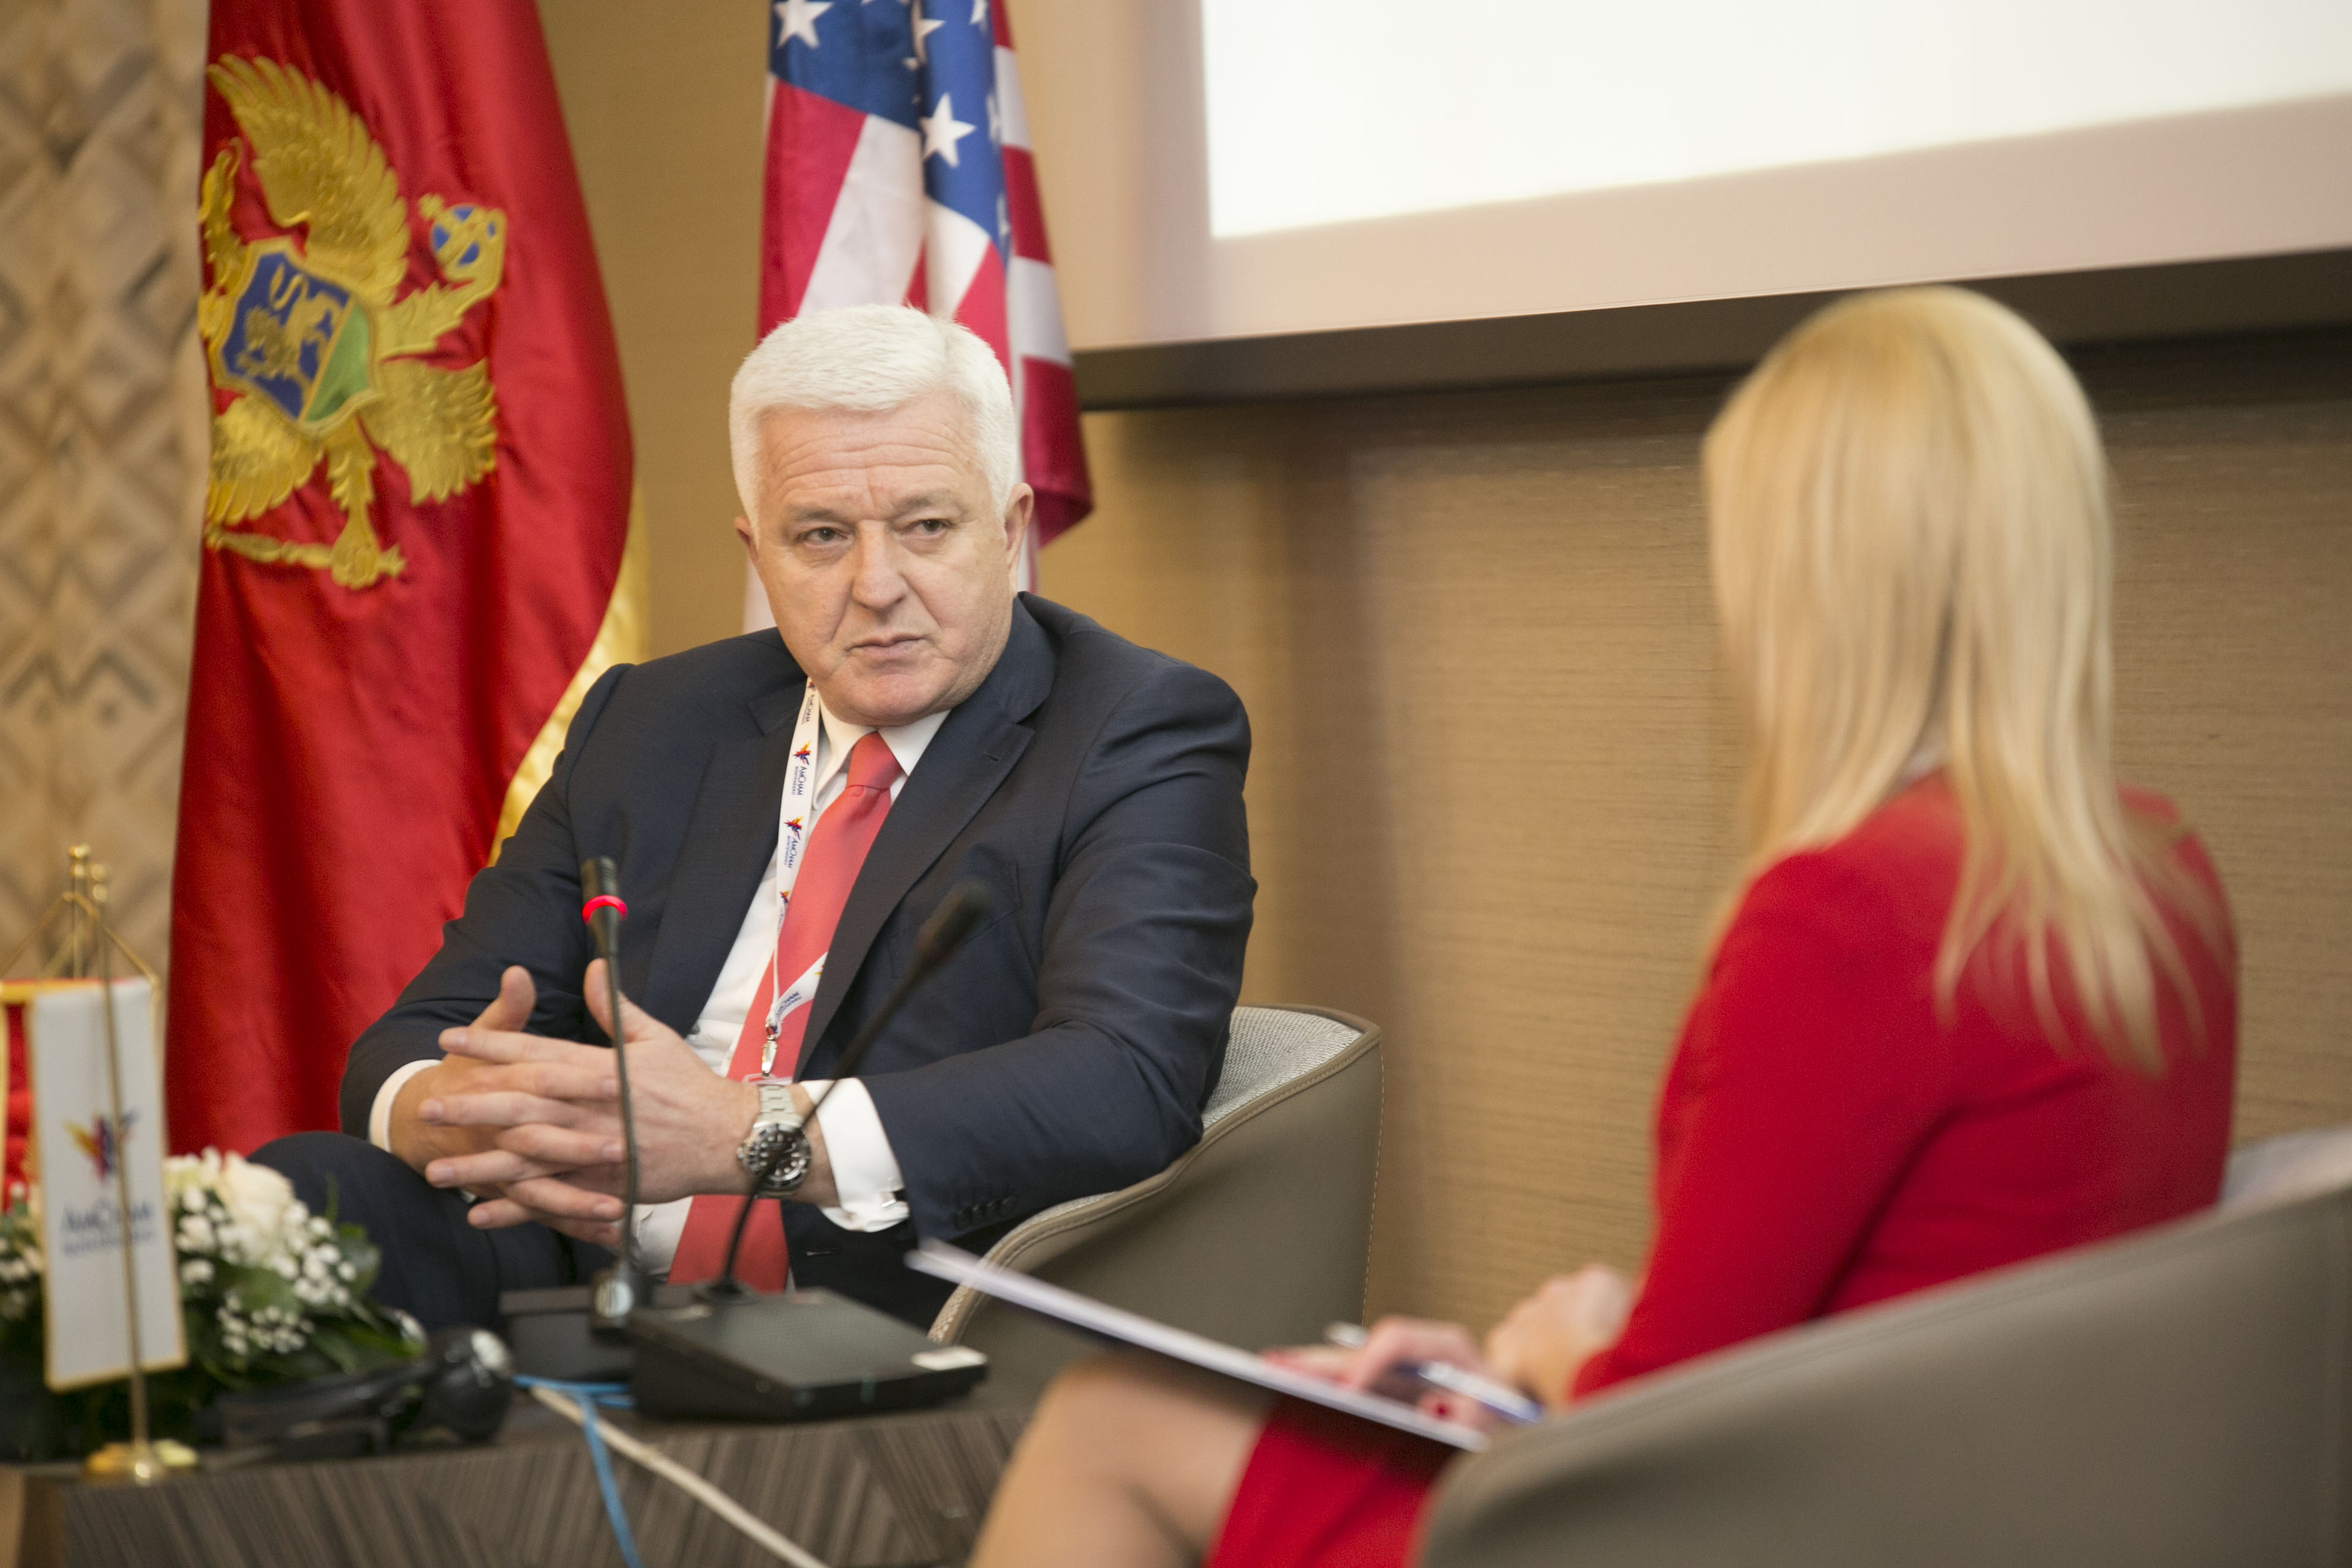 AmCham Montenegro held the conference “Openly with the Prime Minister”